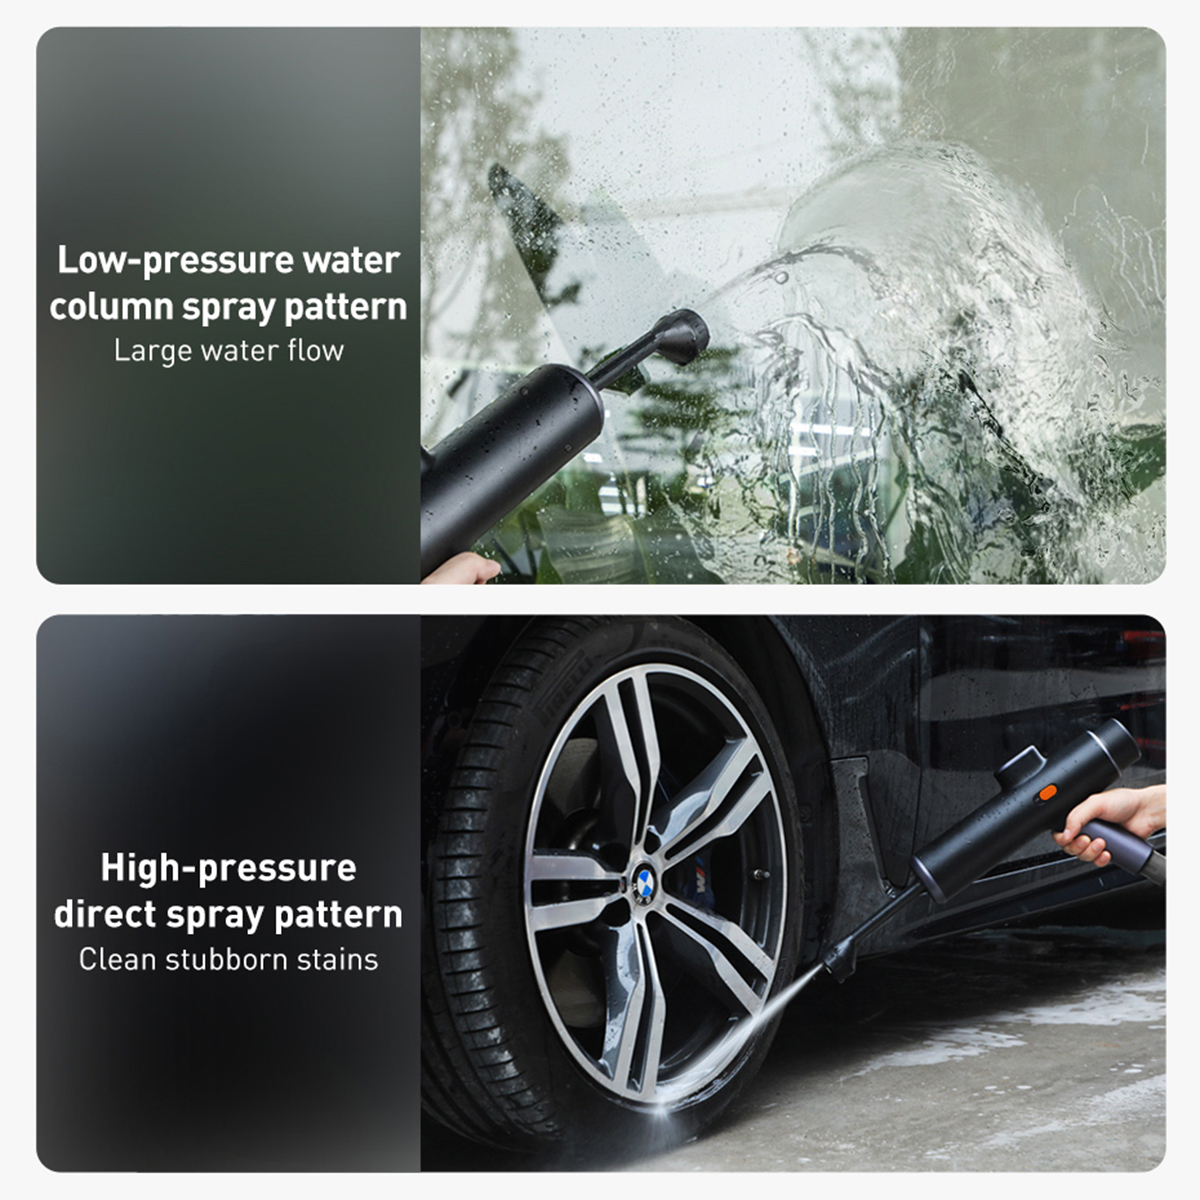 Display-Portable-Cordless-High-Pressure-Washer-Machine-USB-Rechargeable-Electric-Car-Washing-Water-S-1861681-10